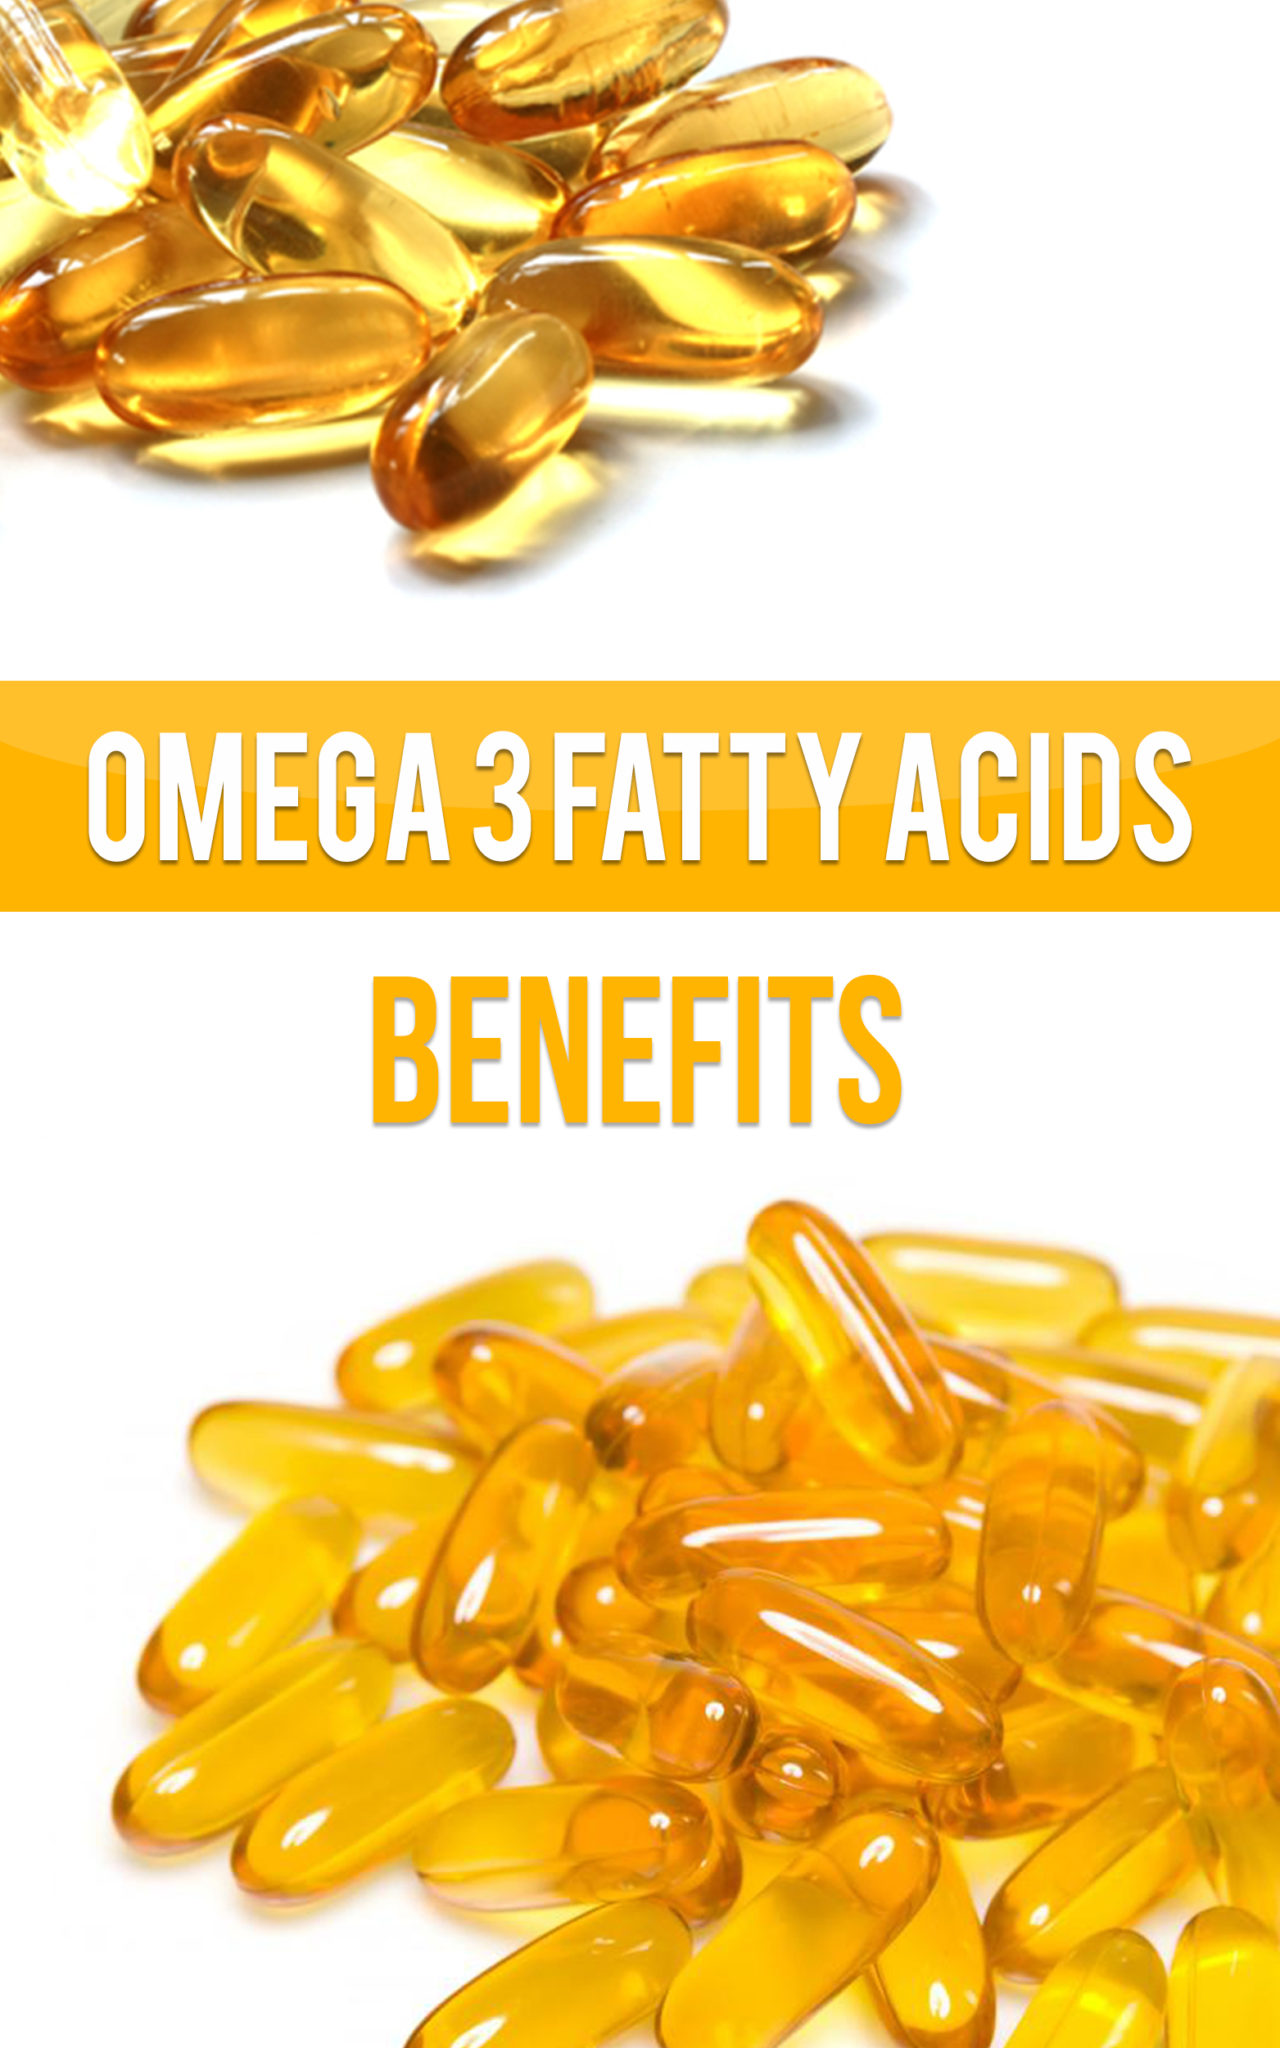 FREE: Omega 3 Fatty Acids: The Benefits by Dr. Phillip Mensin